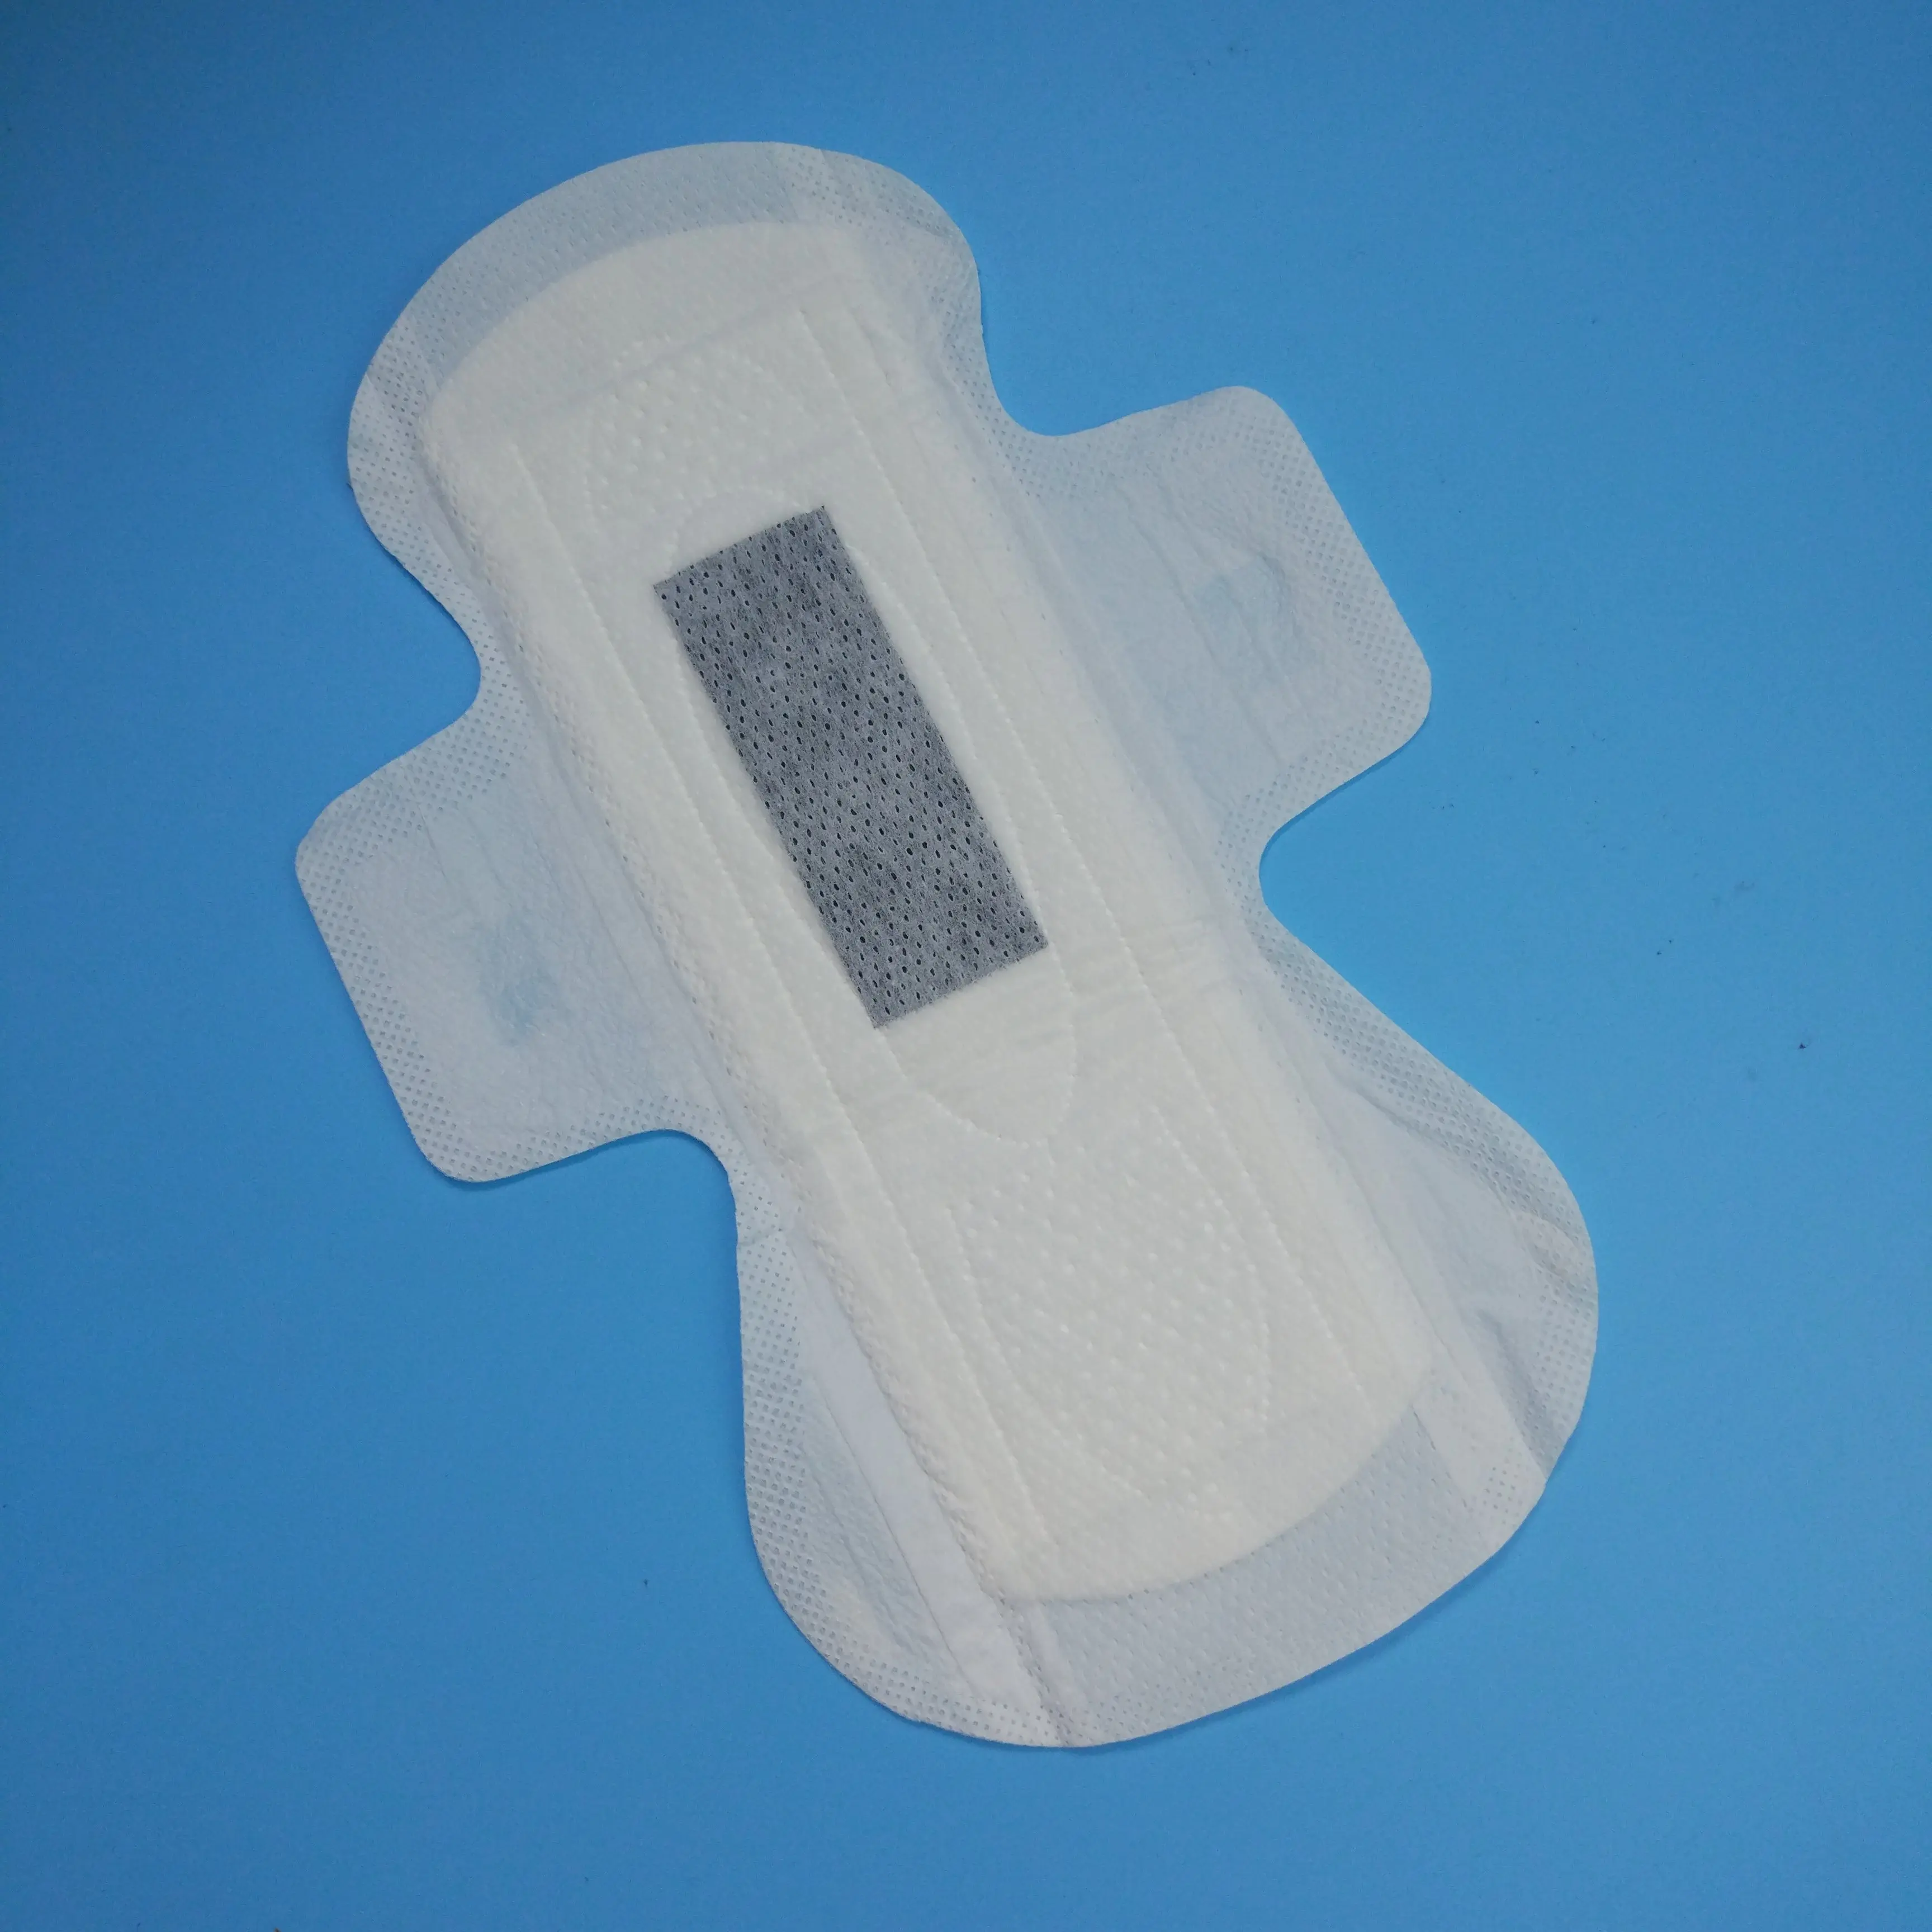 

2020 hot selling sanitary napkins with black anion,soft topsheet,240mm lady pads